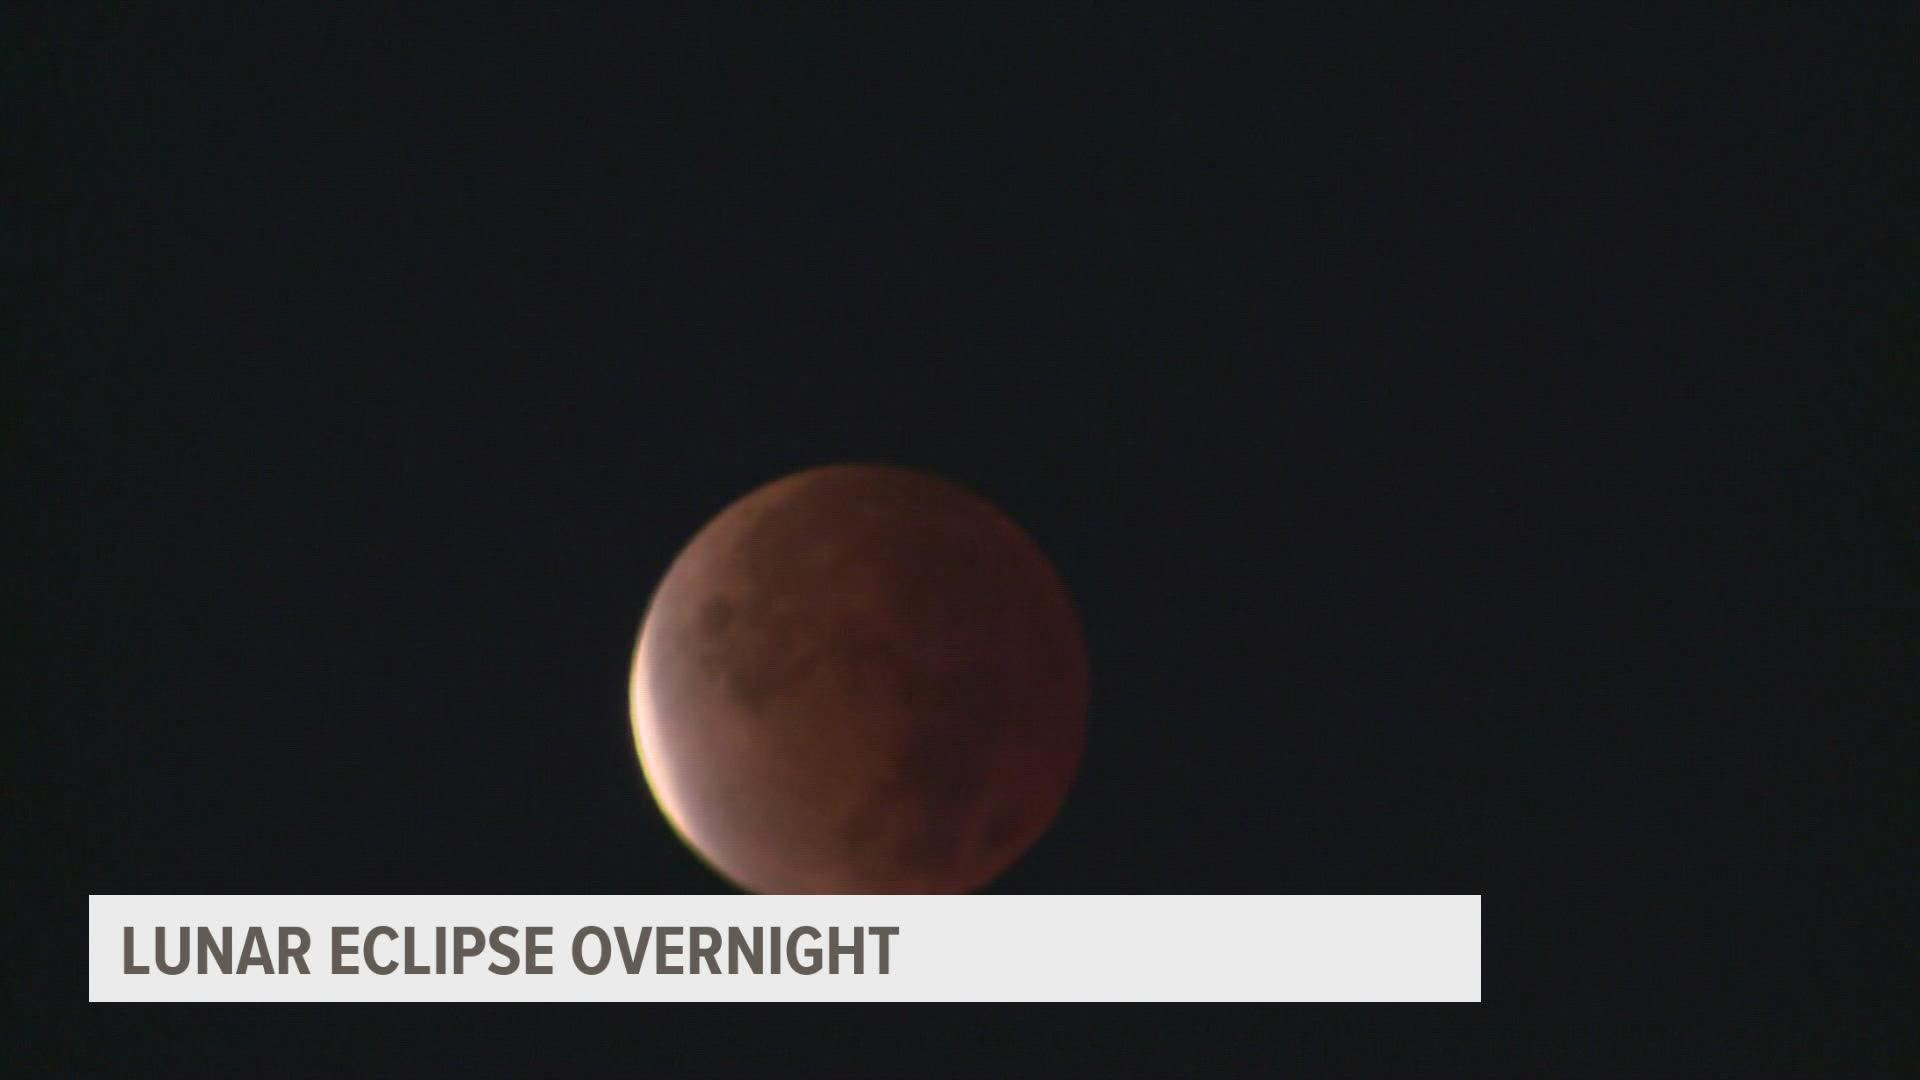 Here's what the partial lunar eclipse looked like over Iowa.